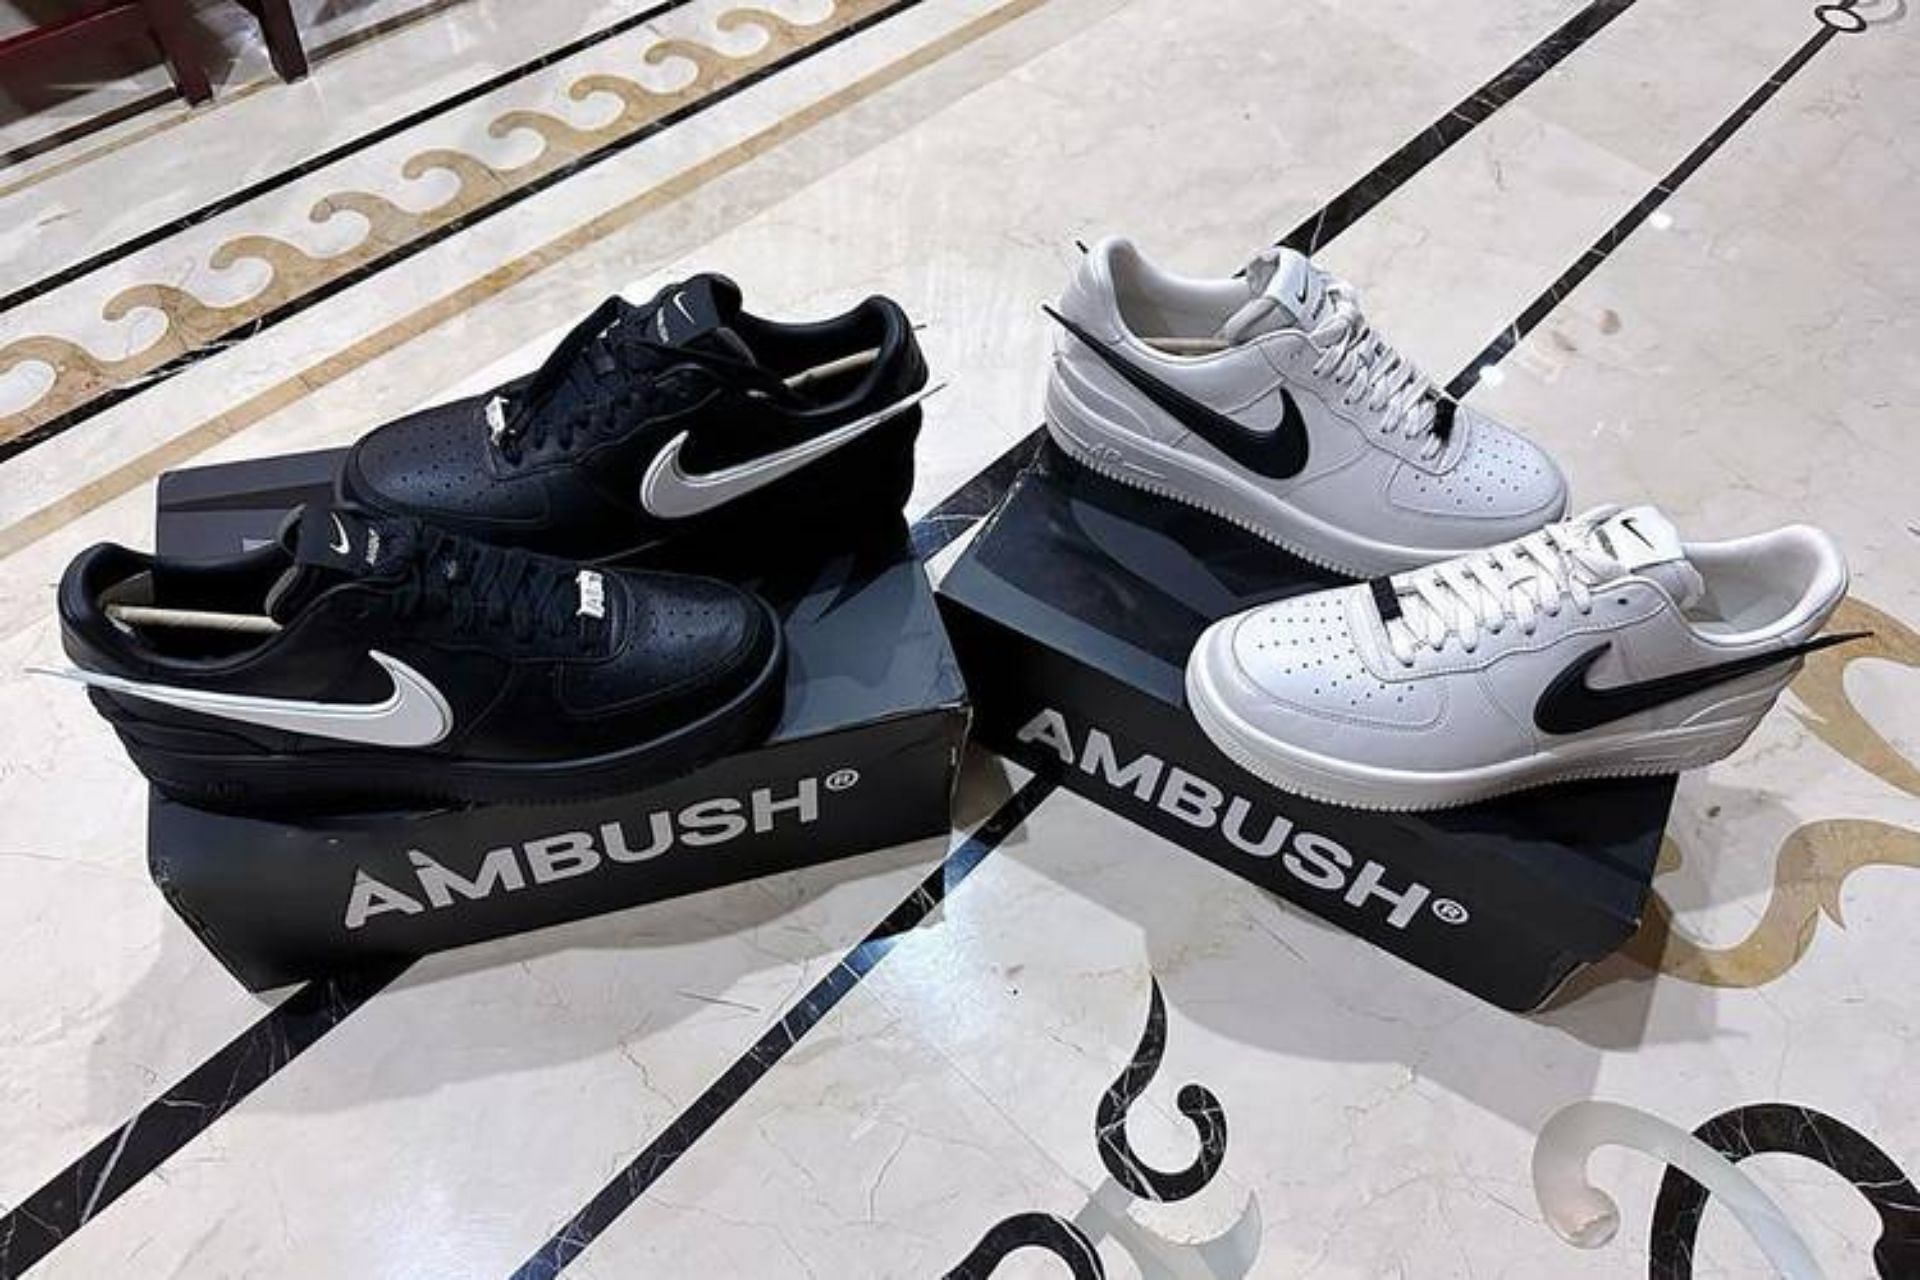 Take a look at the items offered under the latest AMBUSH x Nike Air Force 1 capsule collection (Image via Sportskeeda)